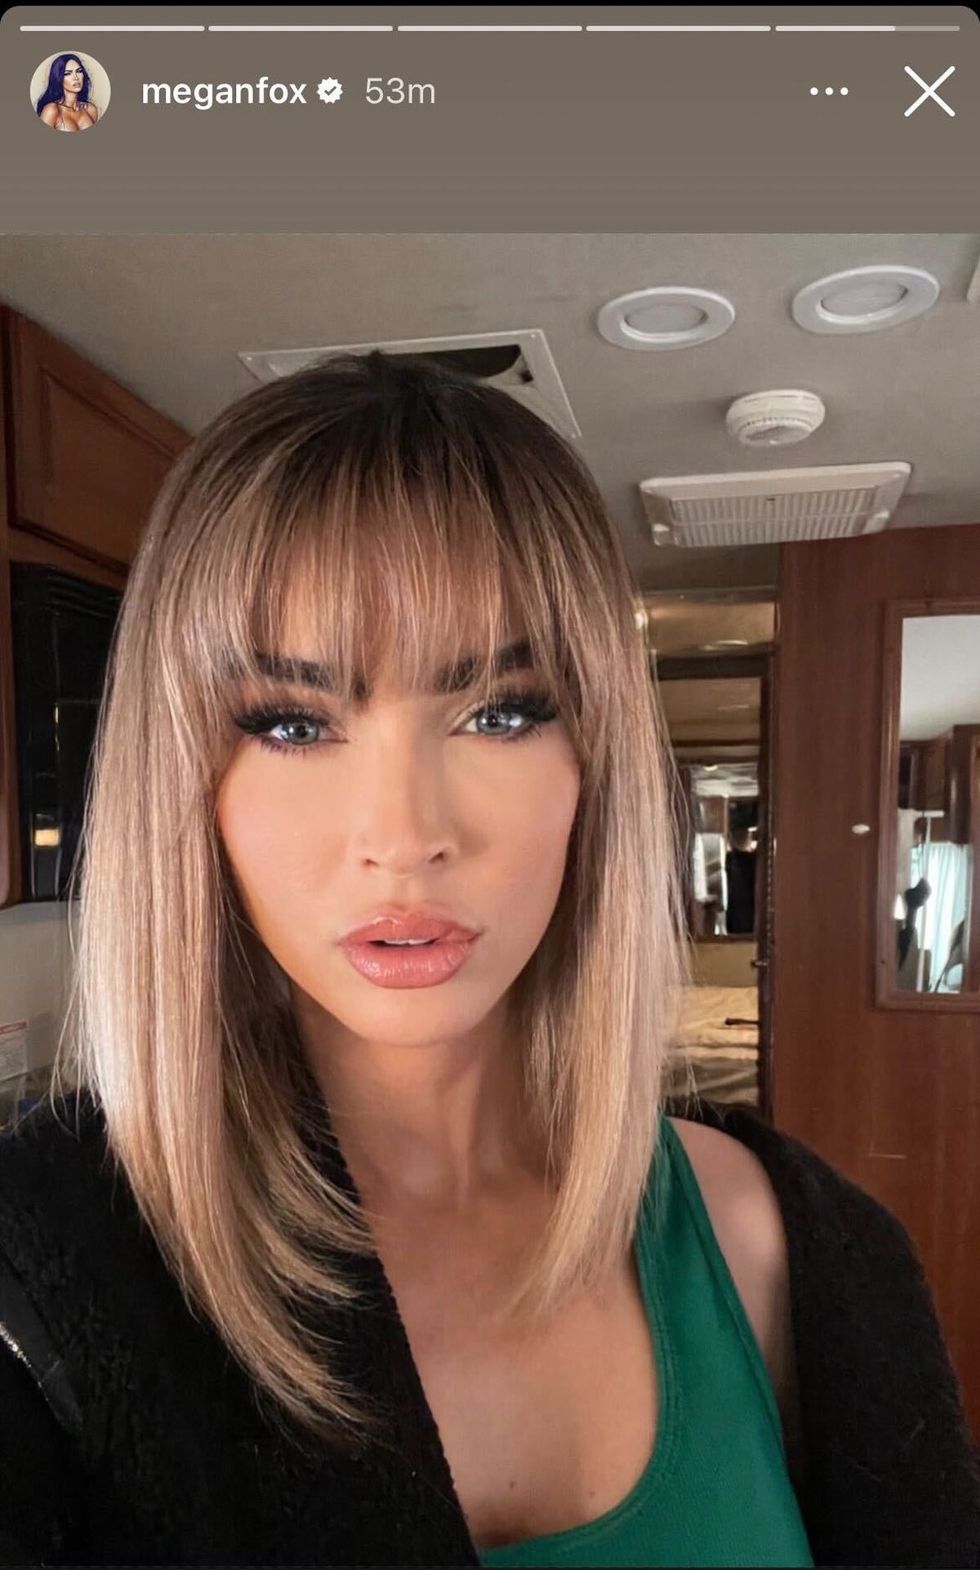 Megan Fox Has Gone Blonde With Bangs in a Dramatic New Year Cut